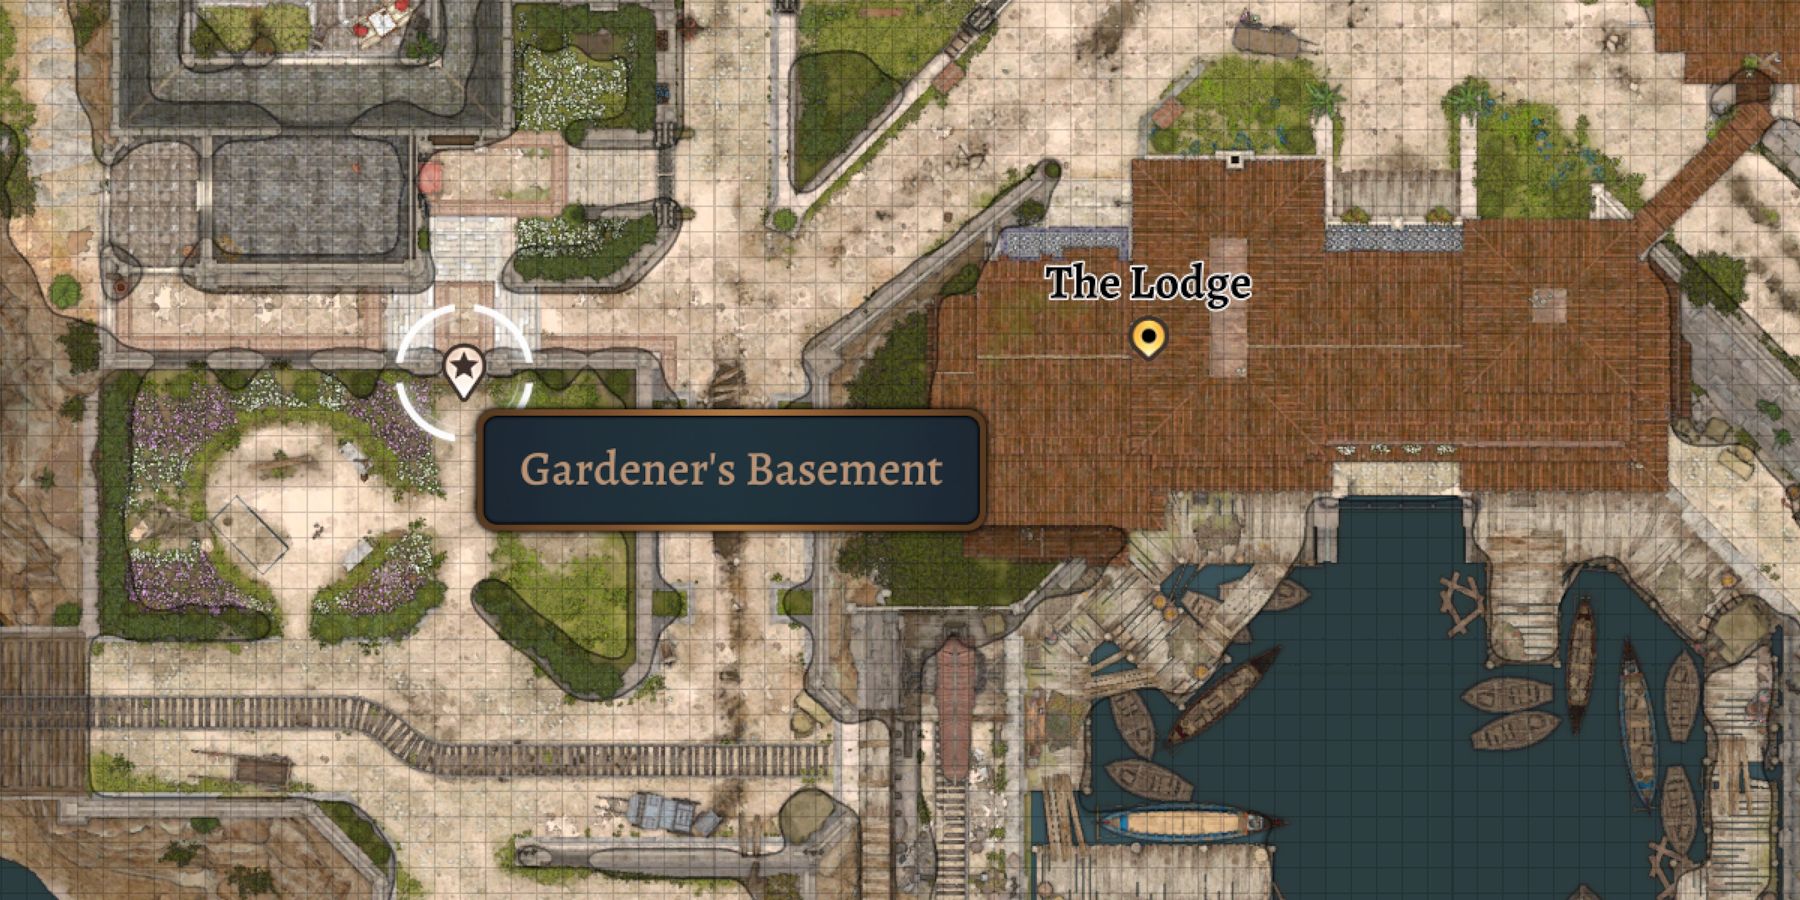 The Garderner's Basement is labeled on the map